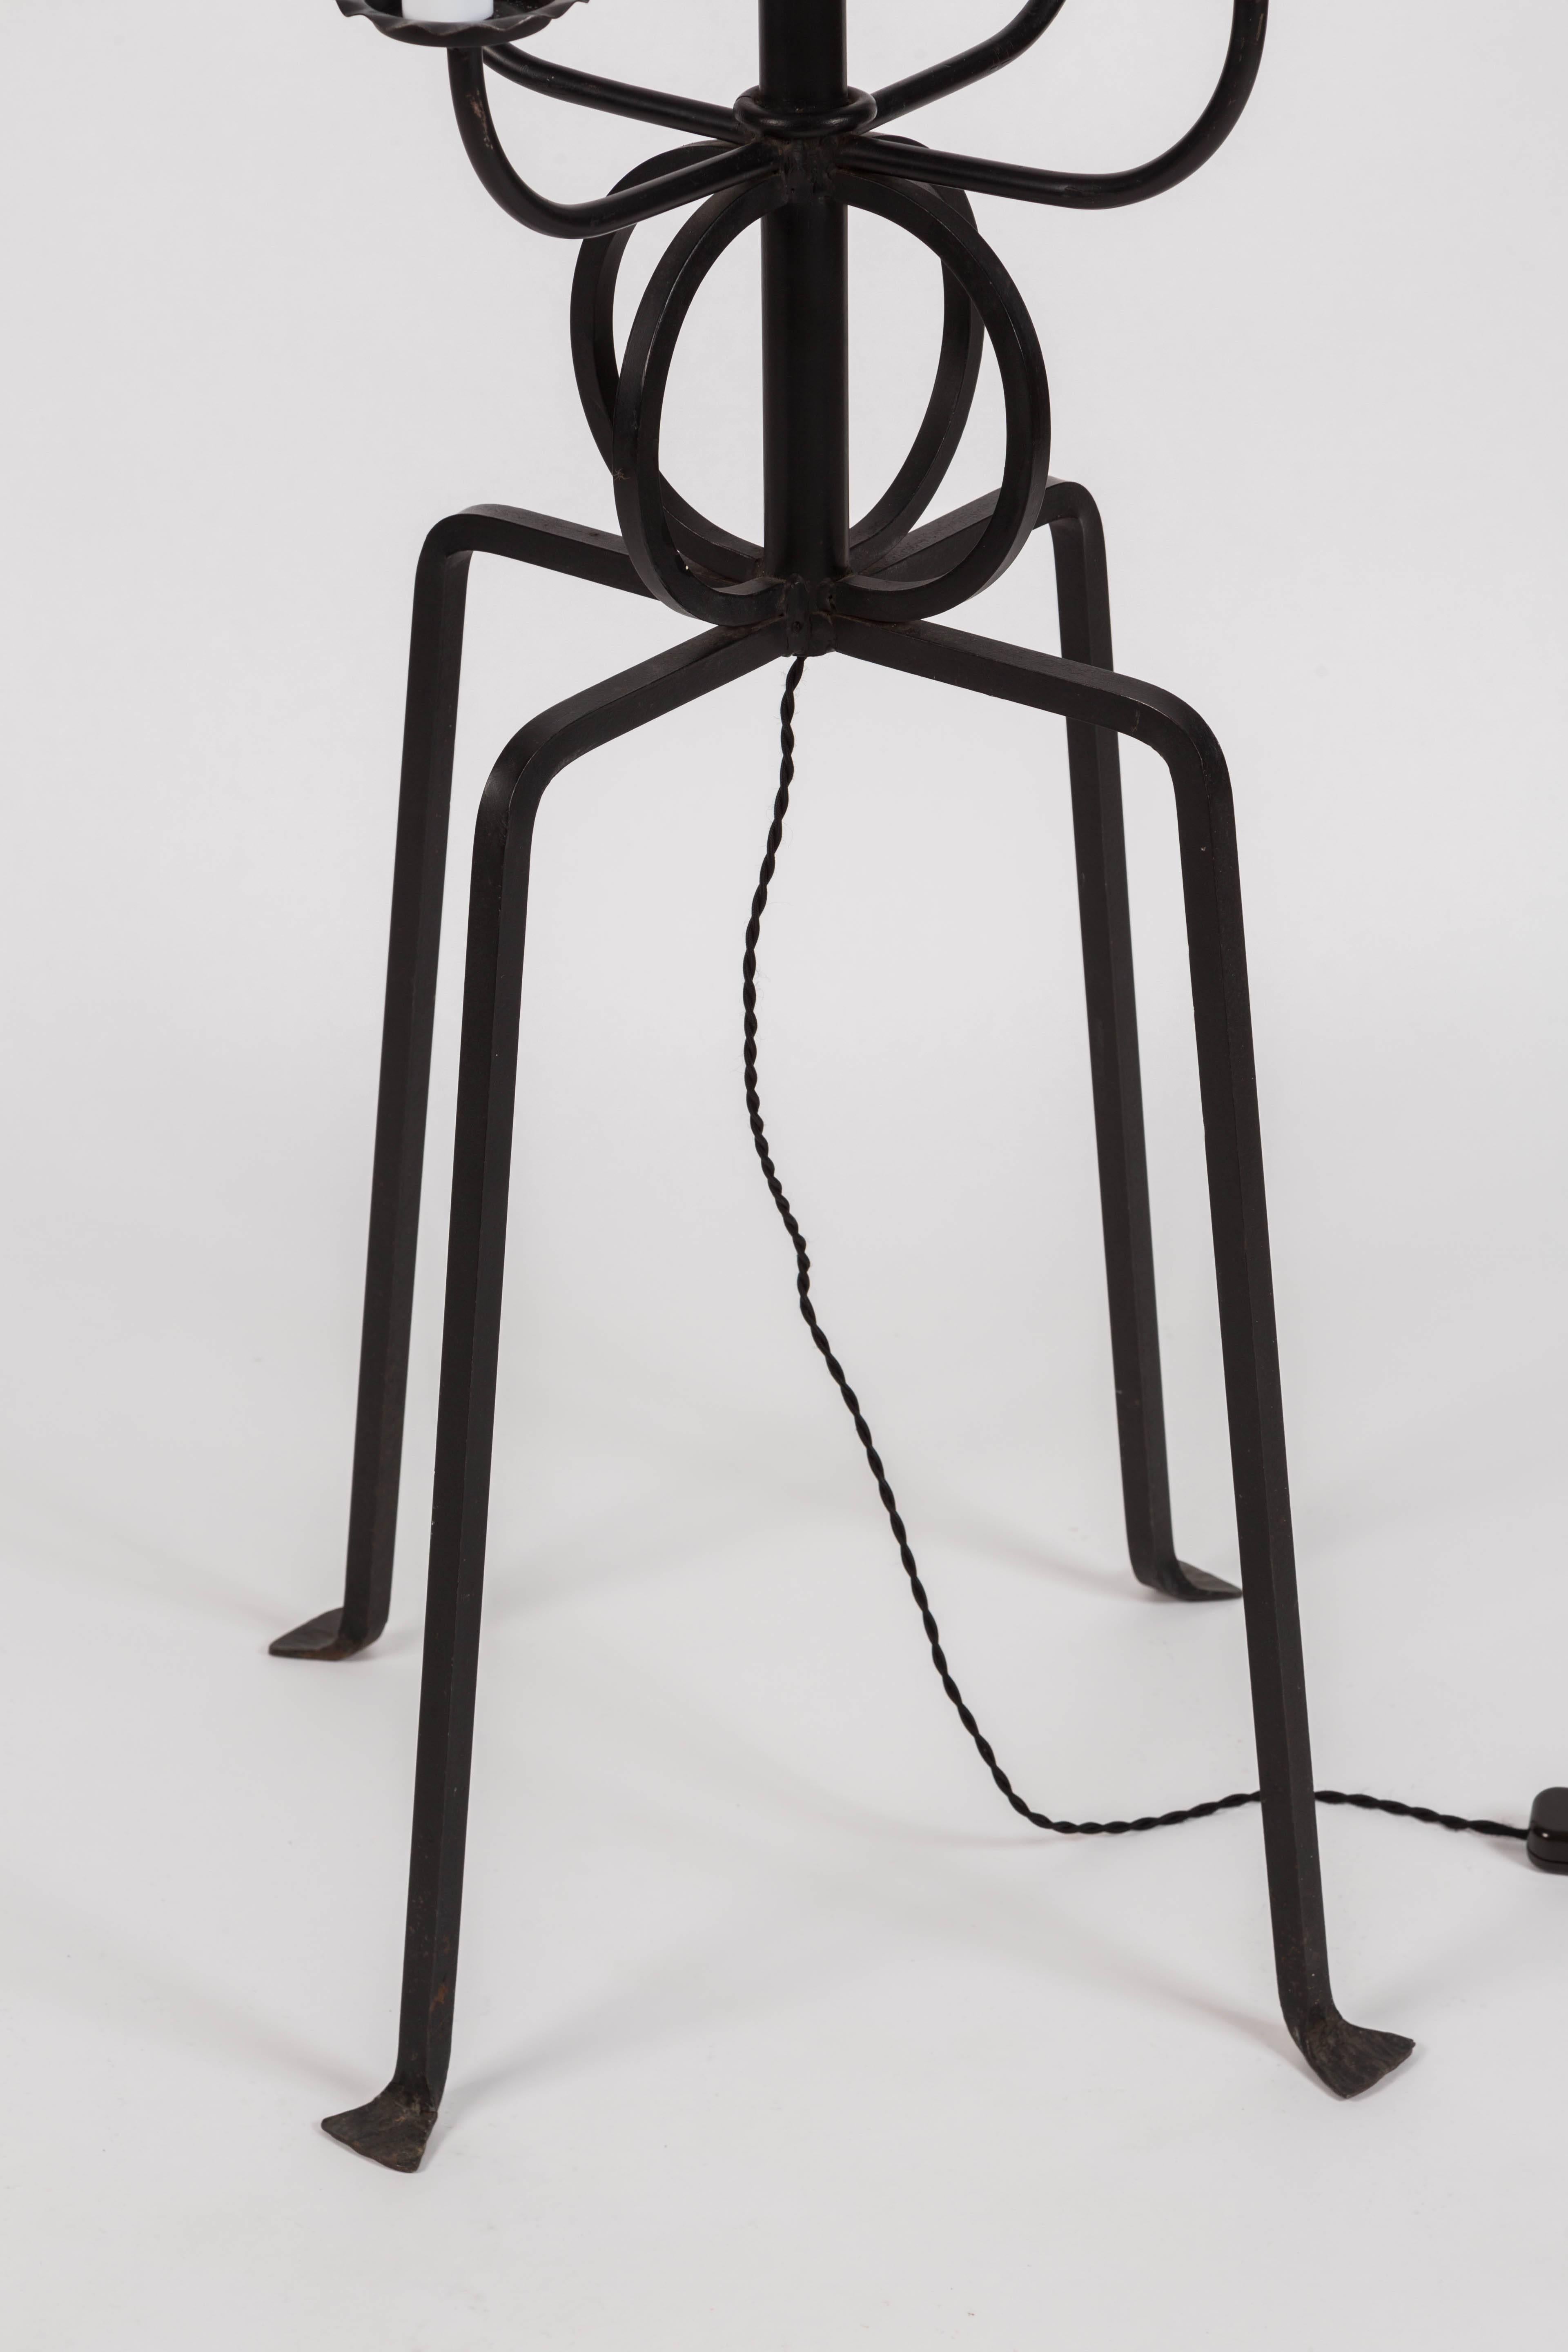 Forged Tommi Parzinger Candlestick Floor Lamp